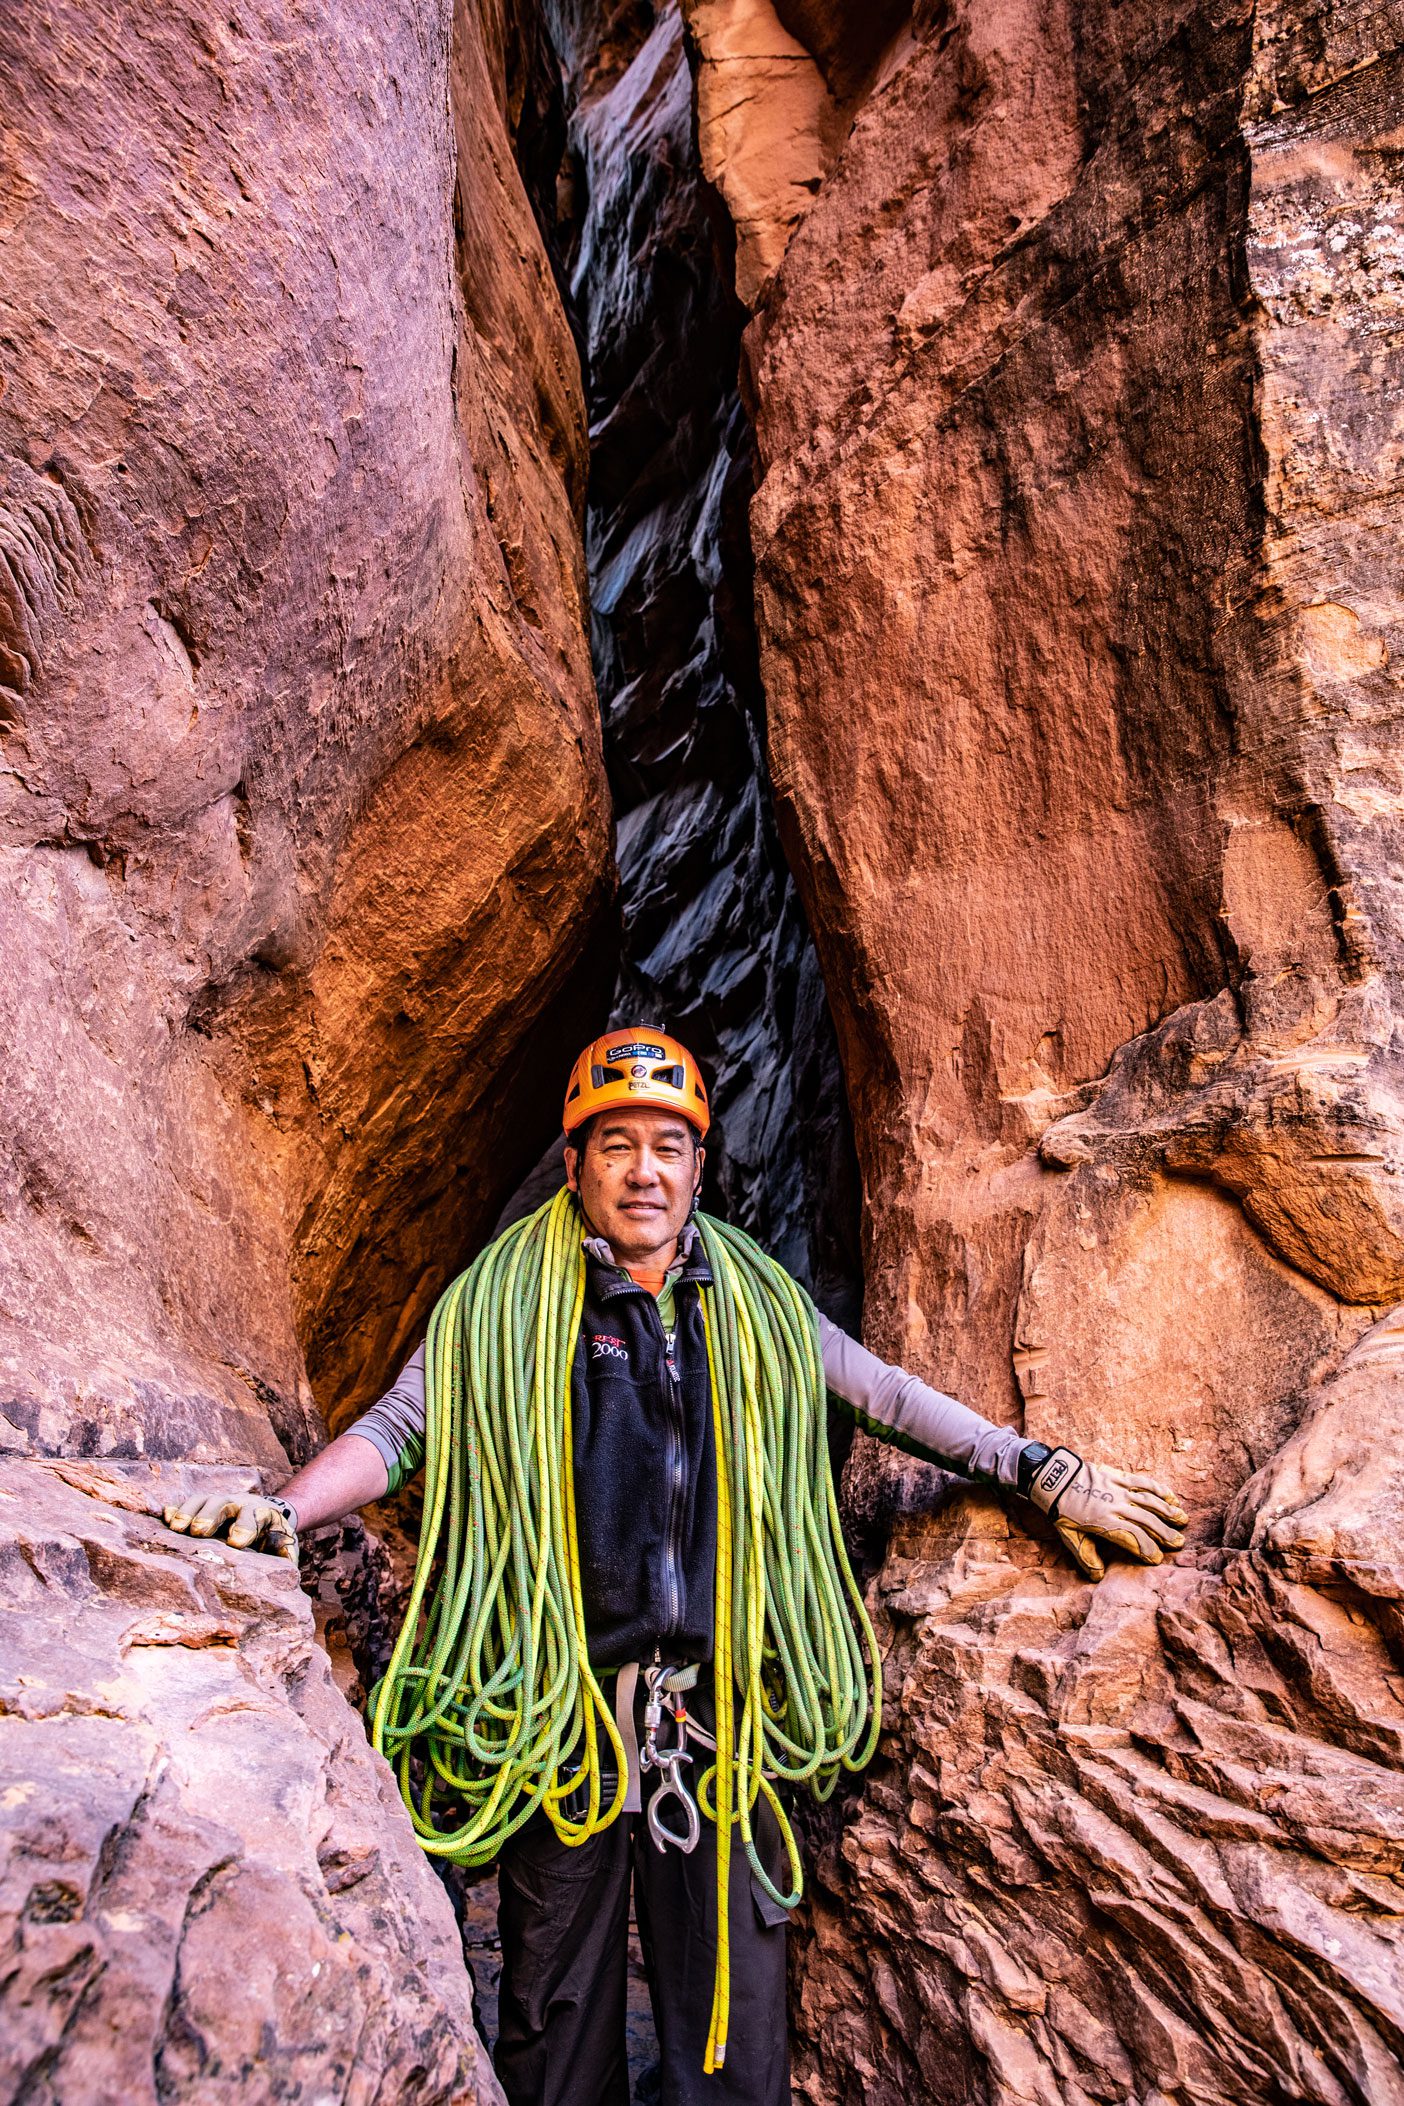 Stacy Taniguchi emerges from a slot canyon with hundreds of feet of climbing rope draped around his shoulders.